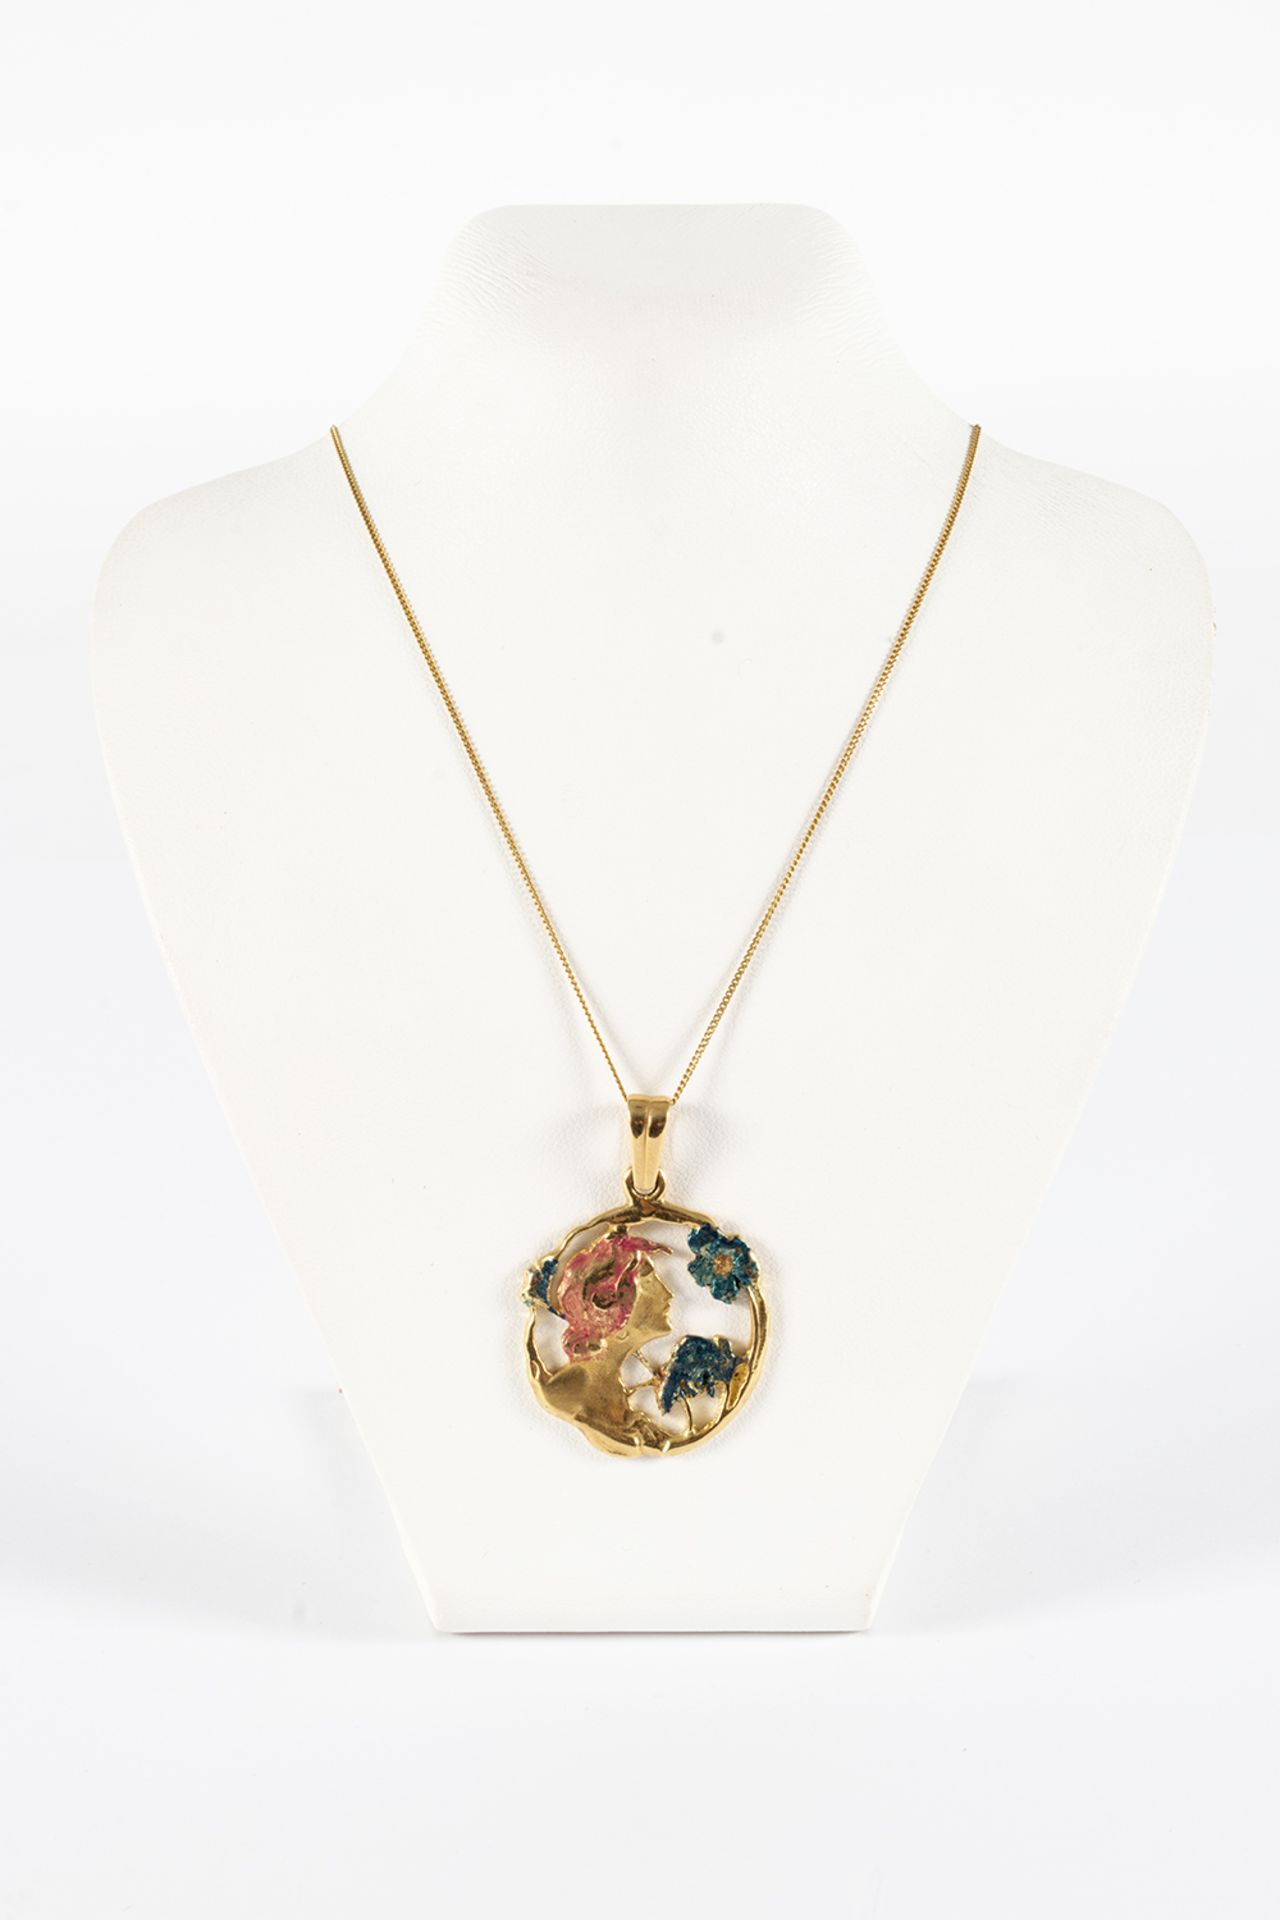 Art Nouveau style pendant in gold and enamel with a female figure, with chain.